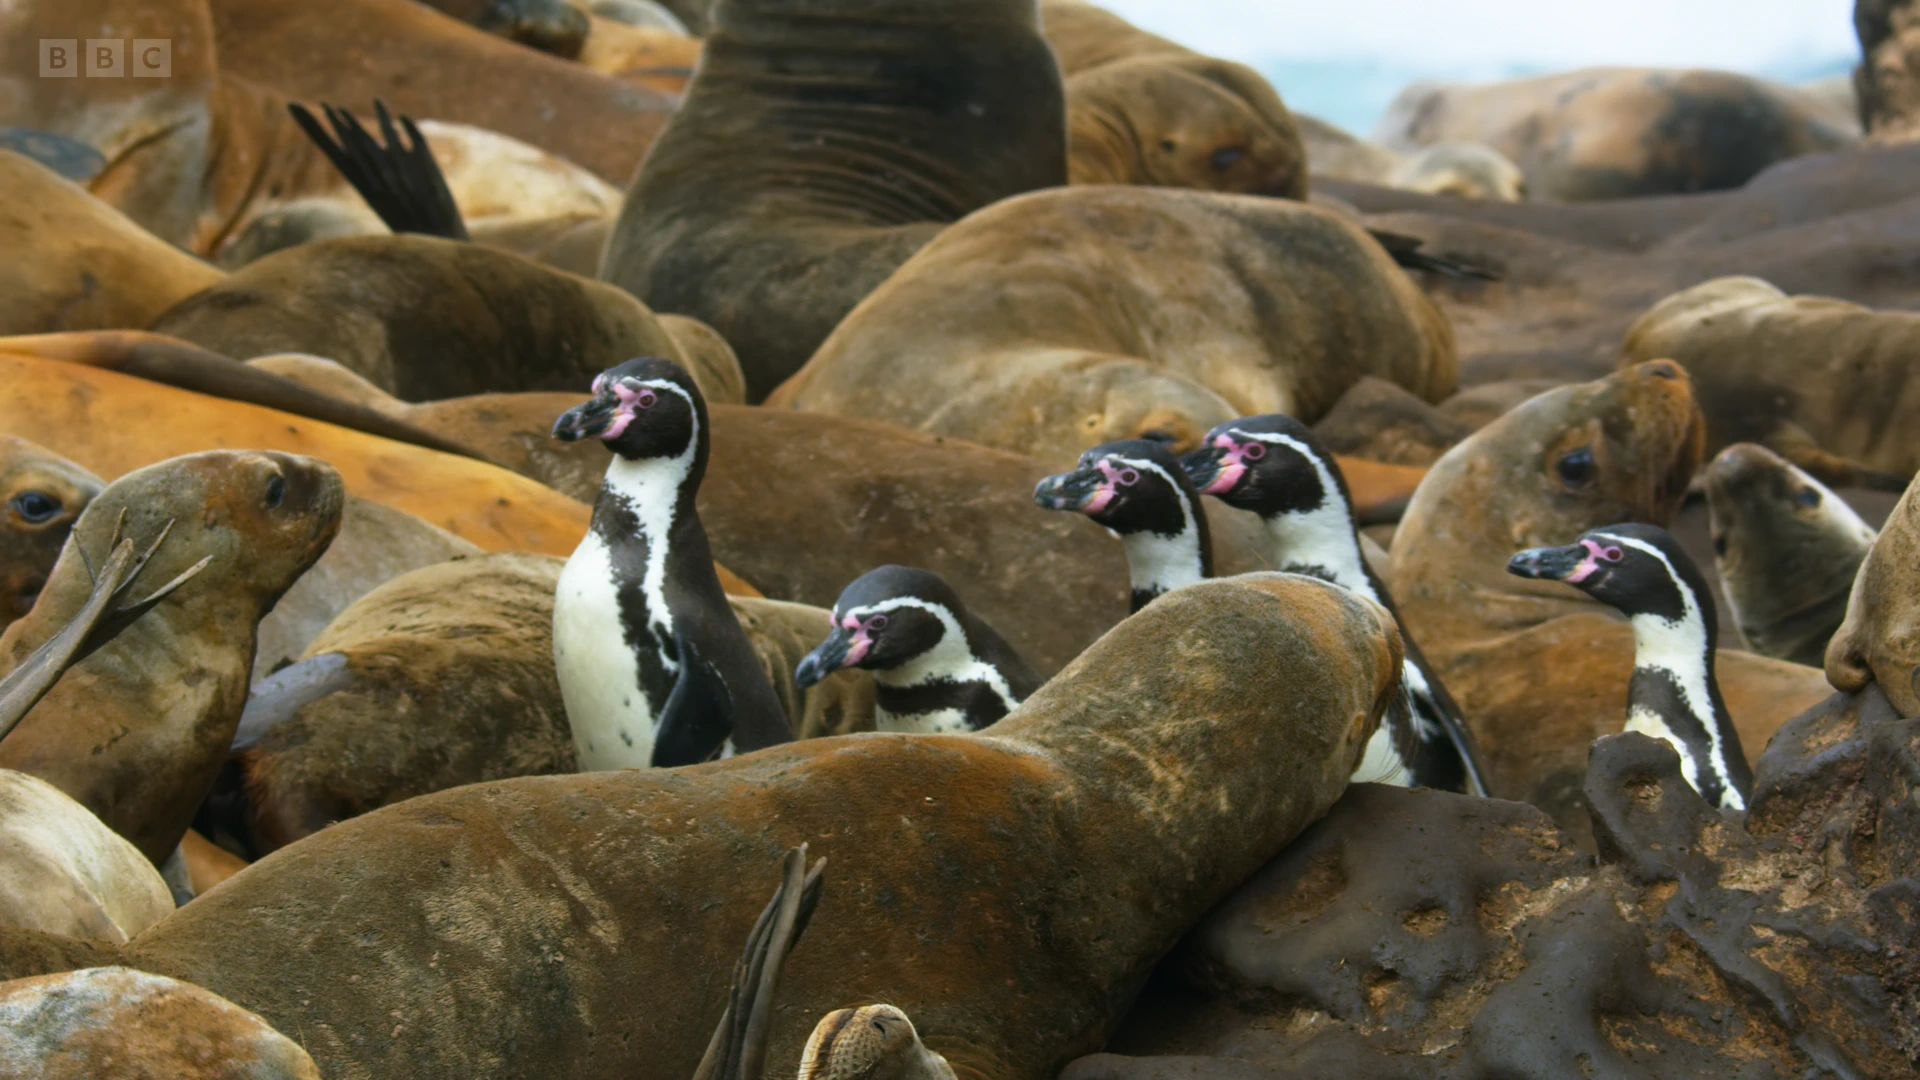 Humboldt penguin (Spheniscus humboldti) as shown in Seven Worlds, One Planet - South America